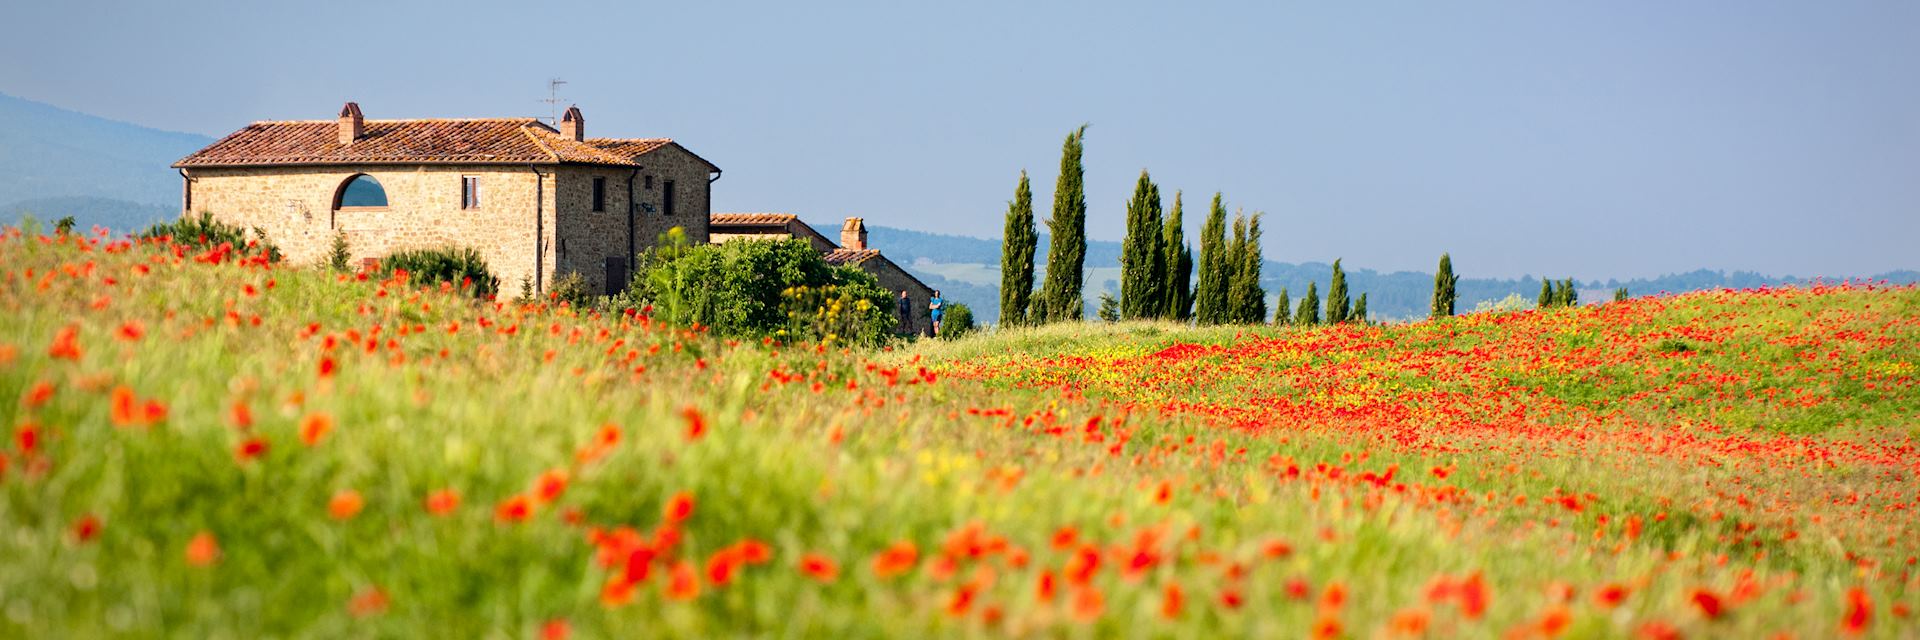 Poppies growing in Tuscany